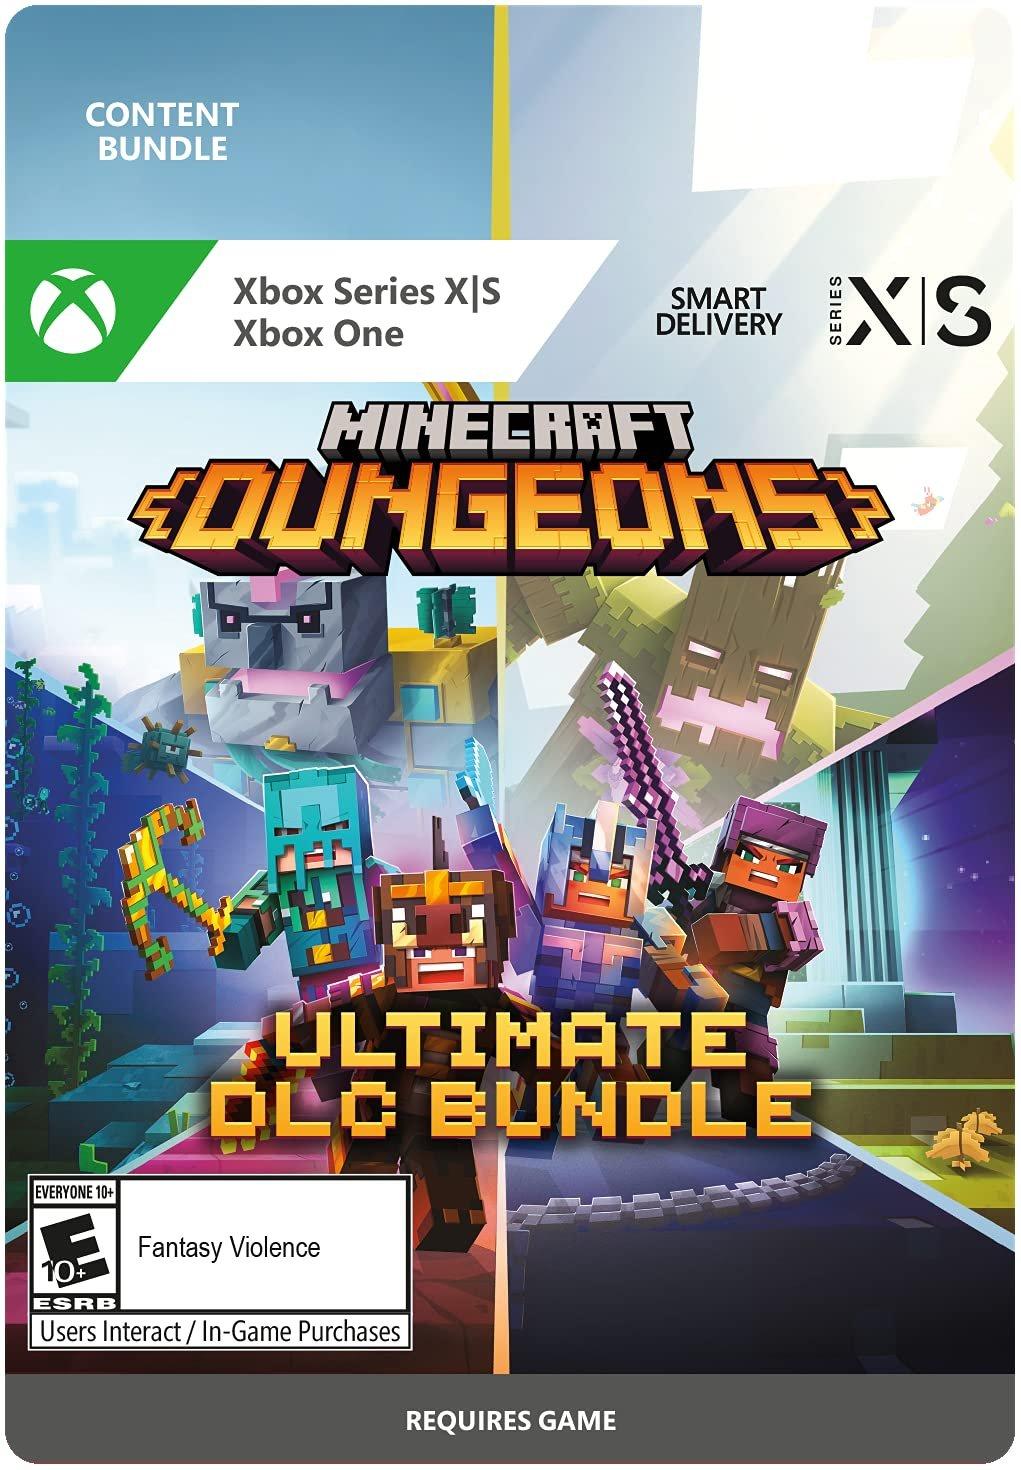 Jogo Minecraft Dungeons: Ultimate Edition - Xbox One / Series